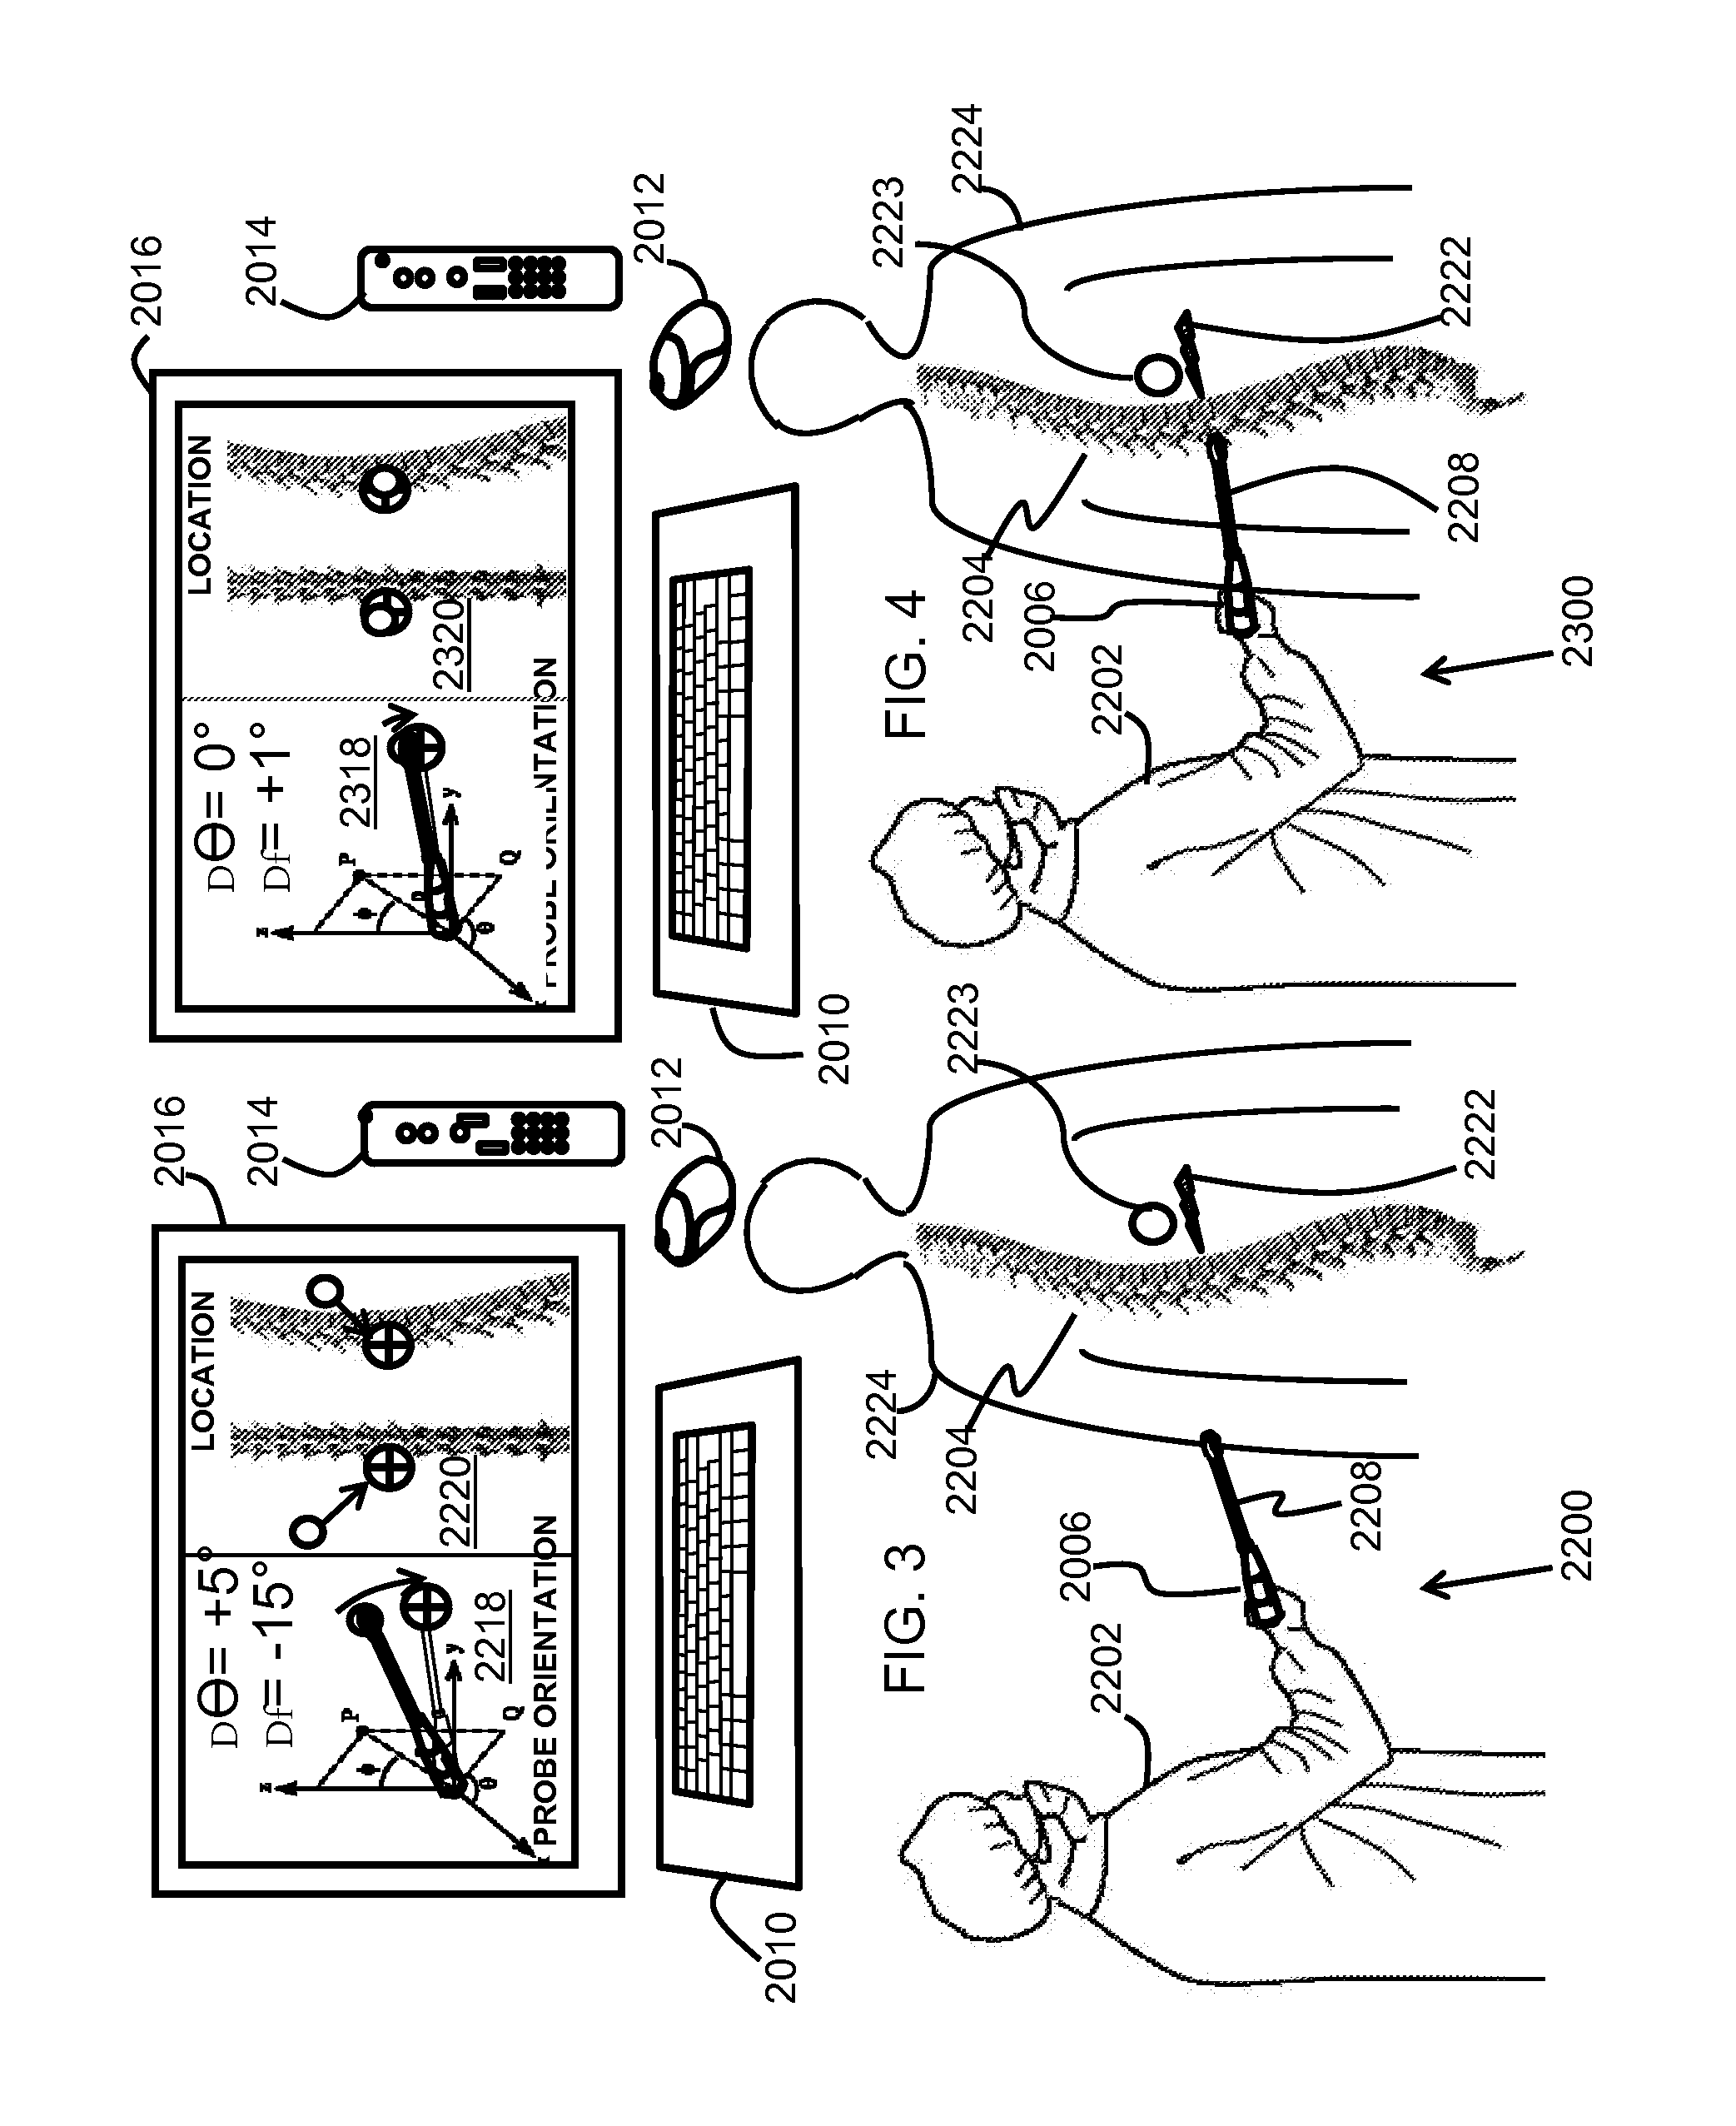 Motion and orientation sensing module or device for positioning of implants